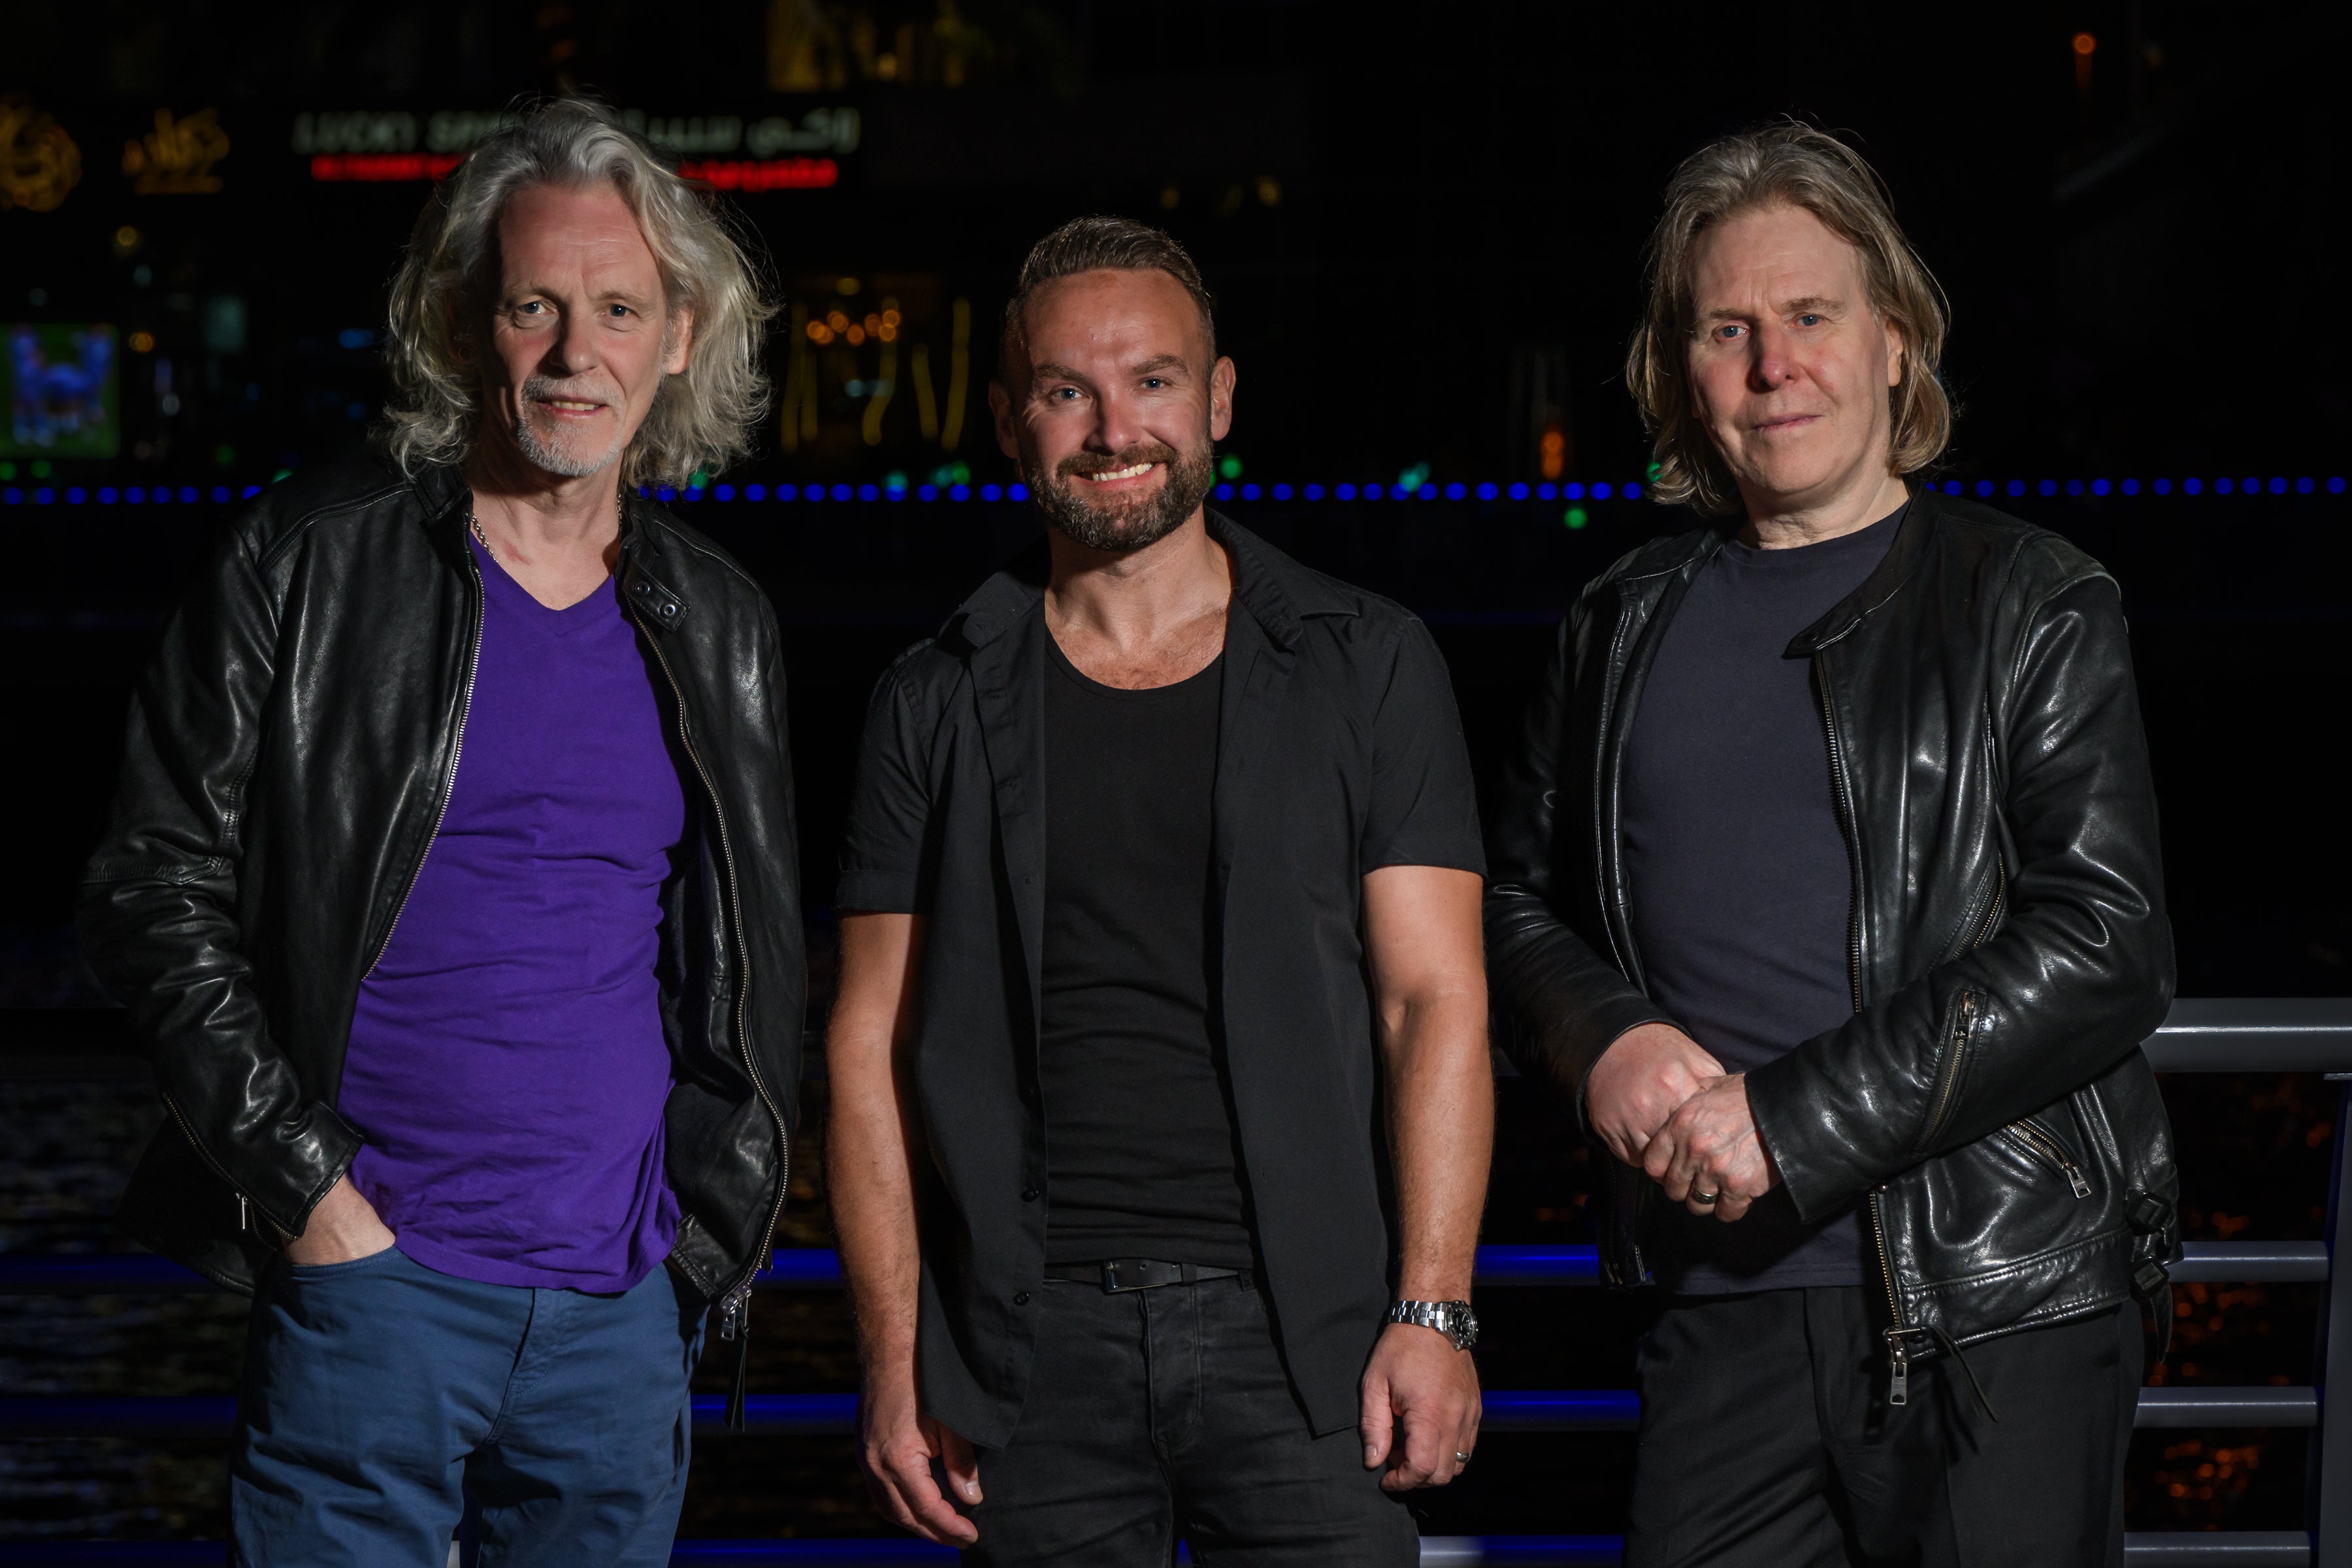 members only presale code for Wet Wet Wet face value tickets in Basingstoke at The Anvil